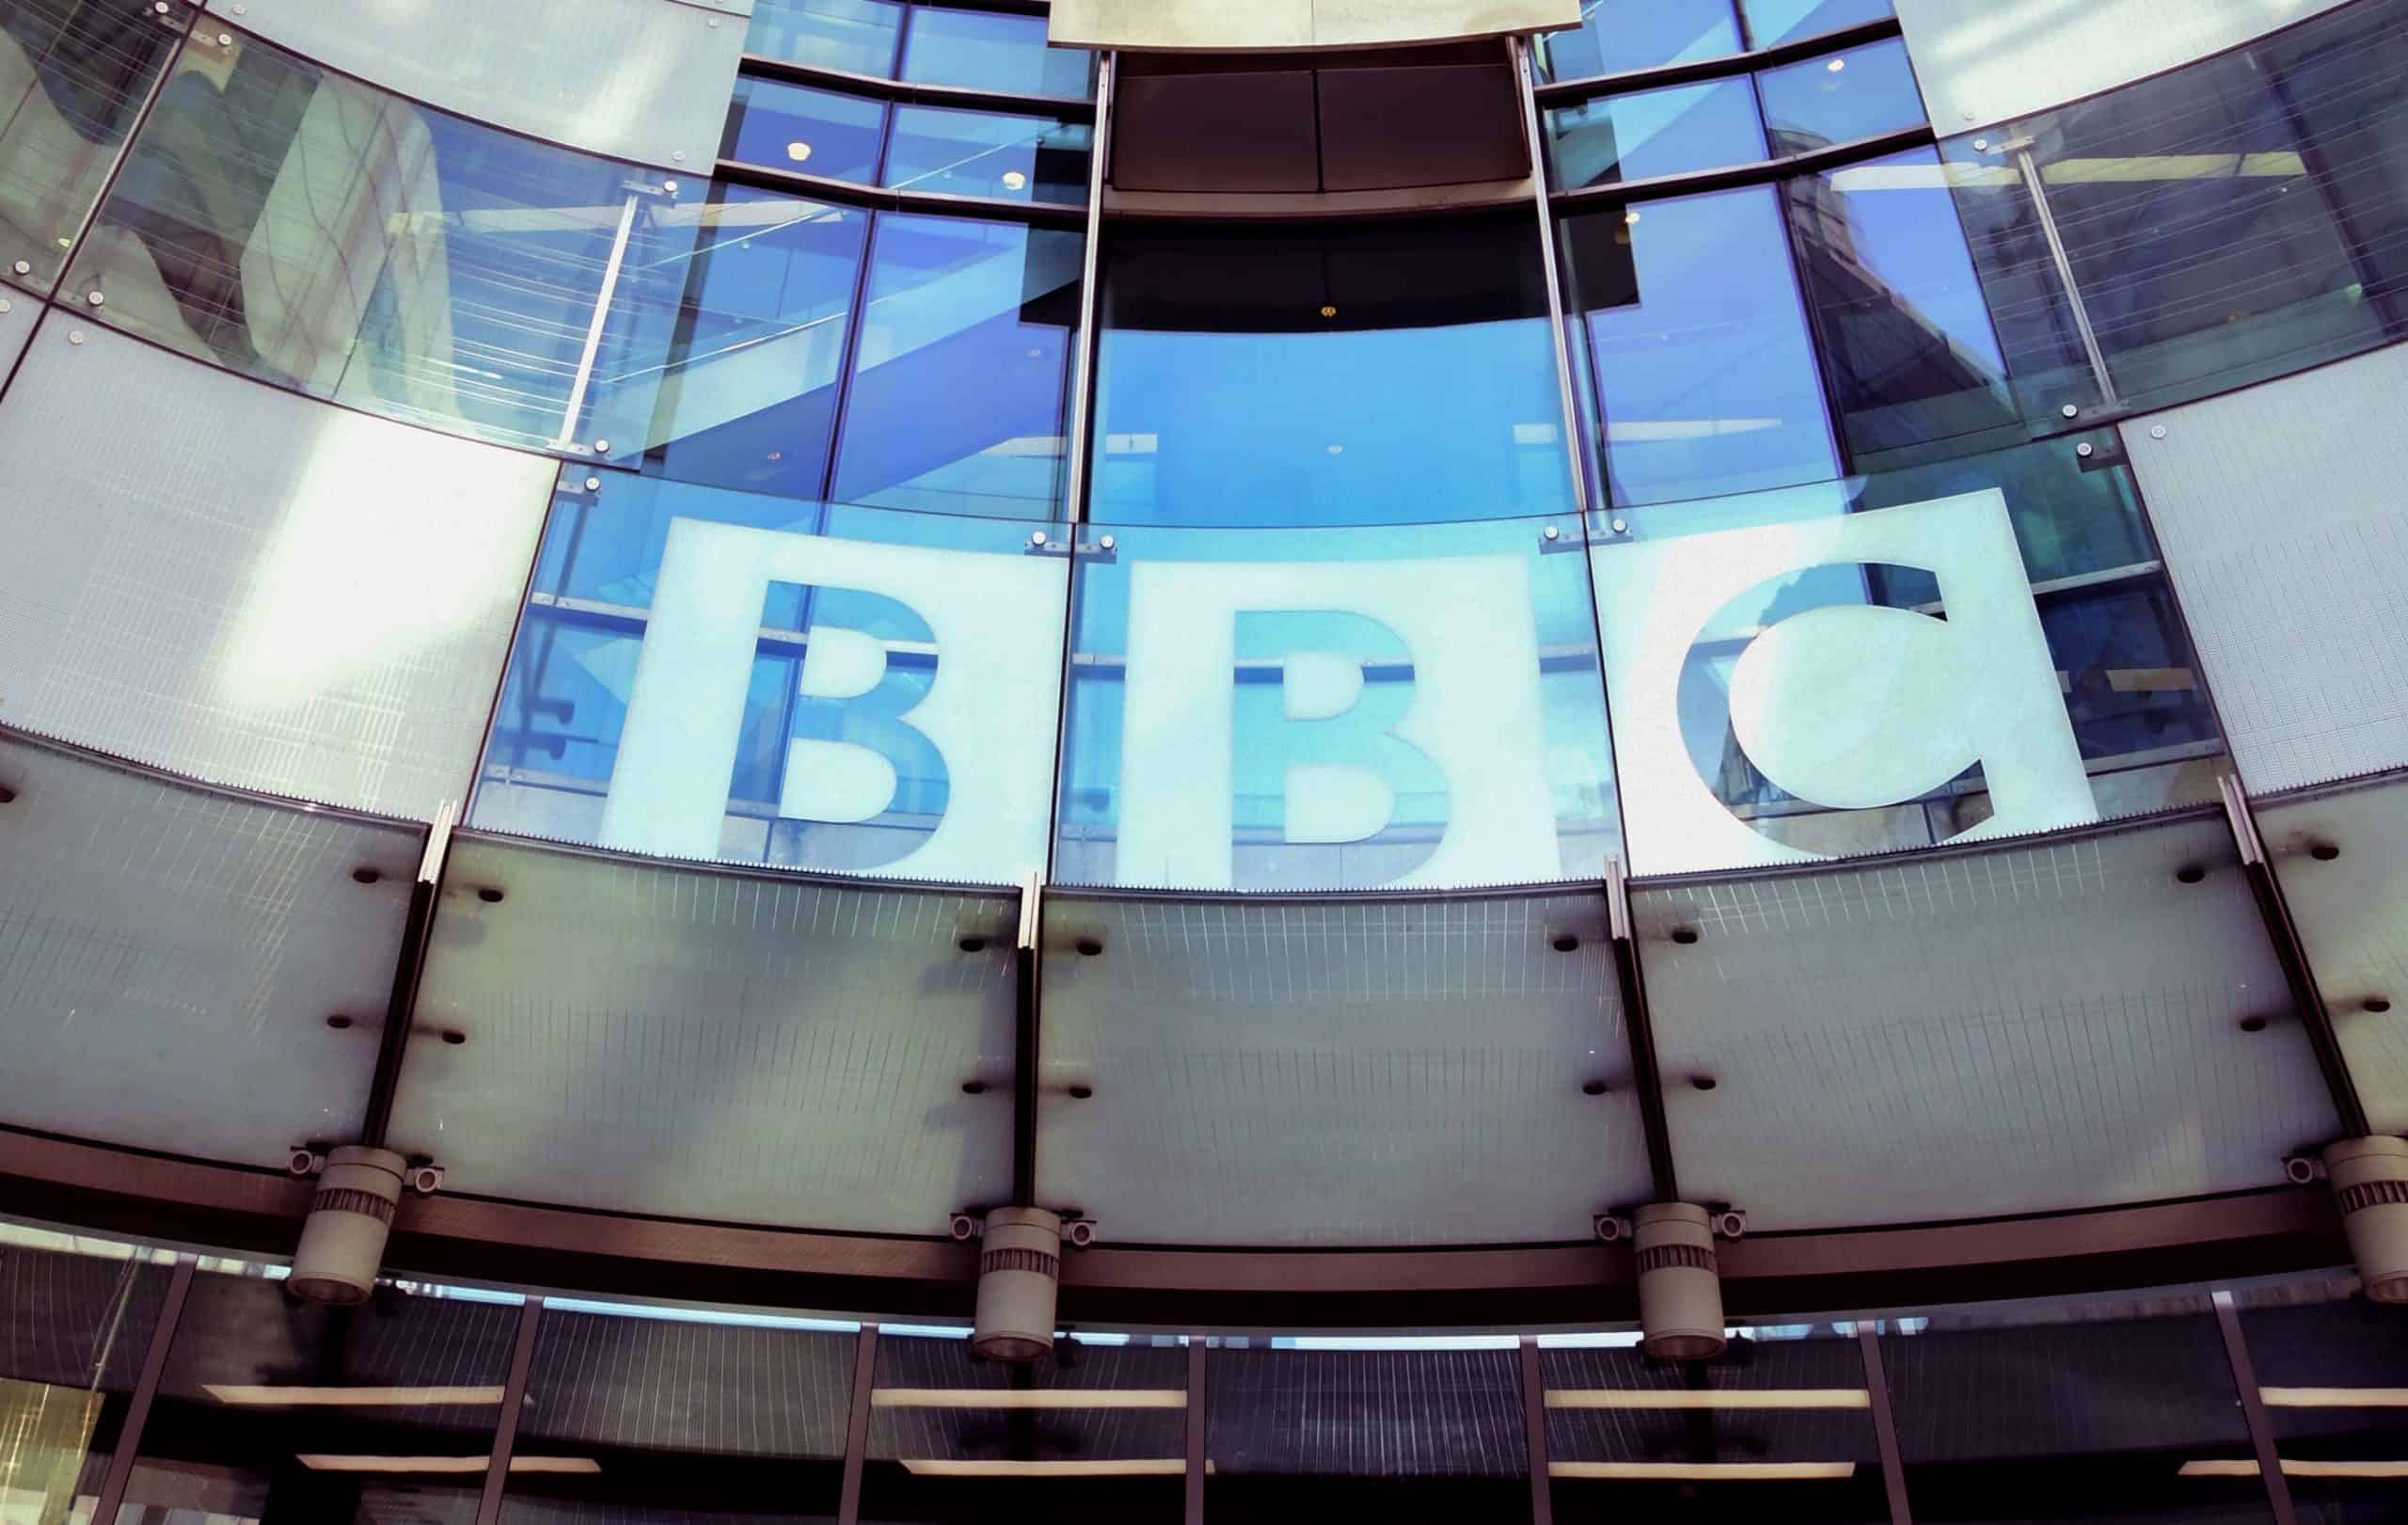 BBC reporting ‘not politically biased’, but ‘strongly led by Westminster narrative’